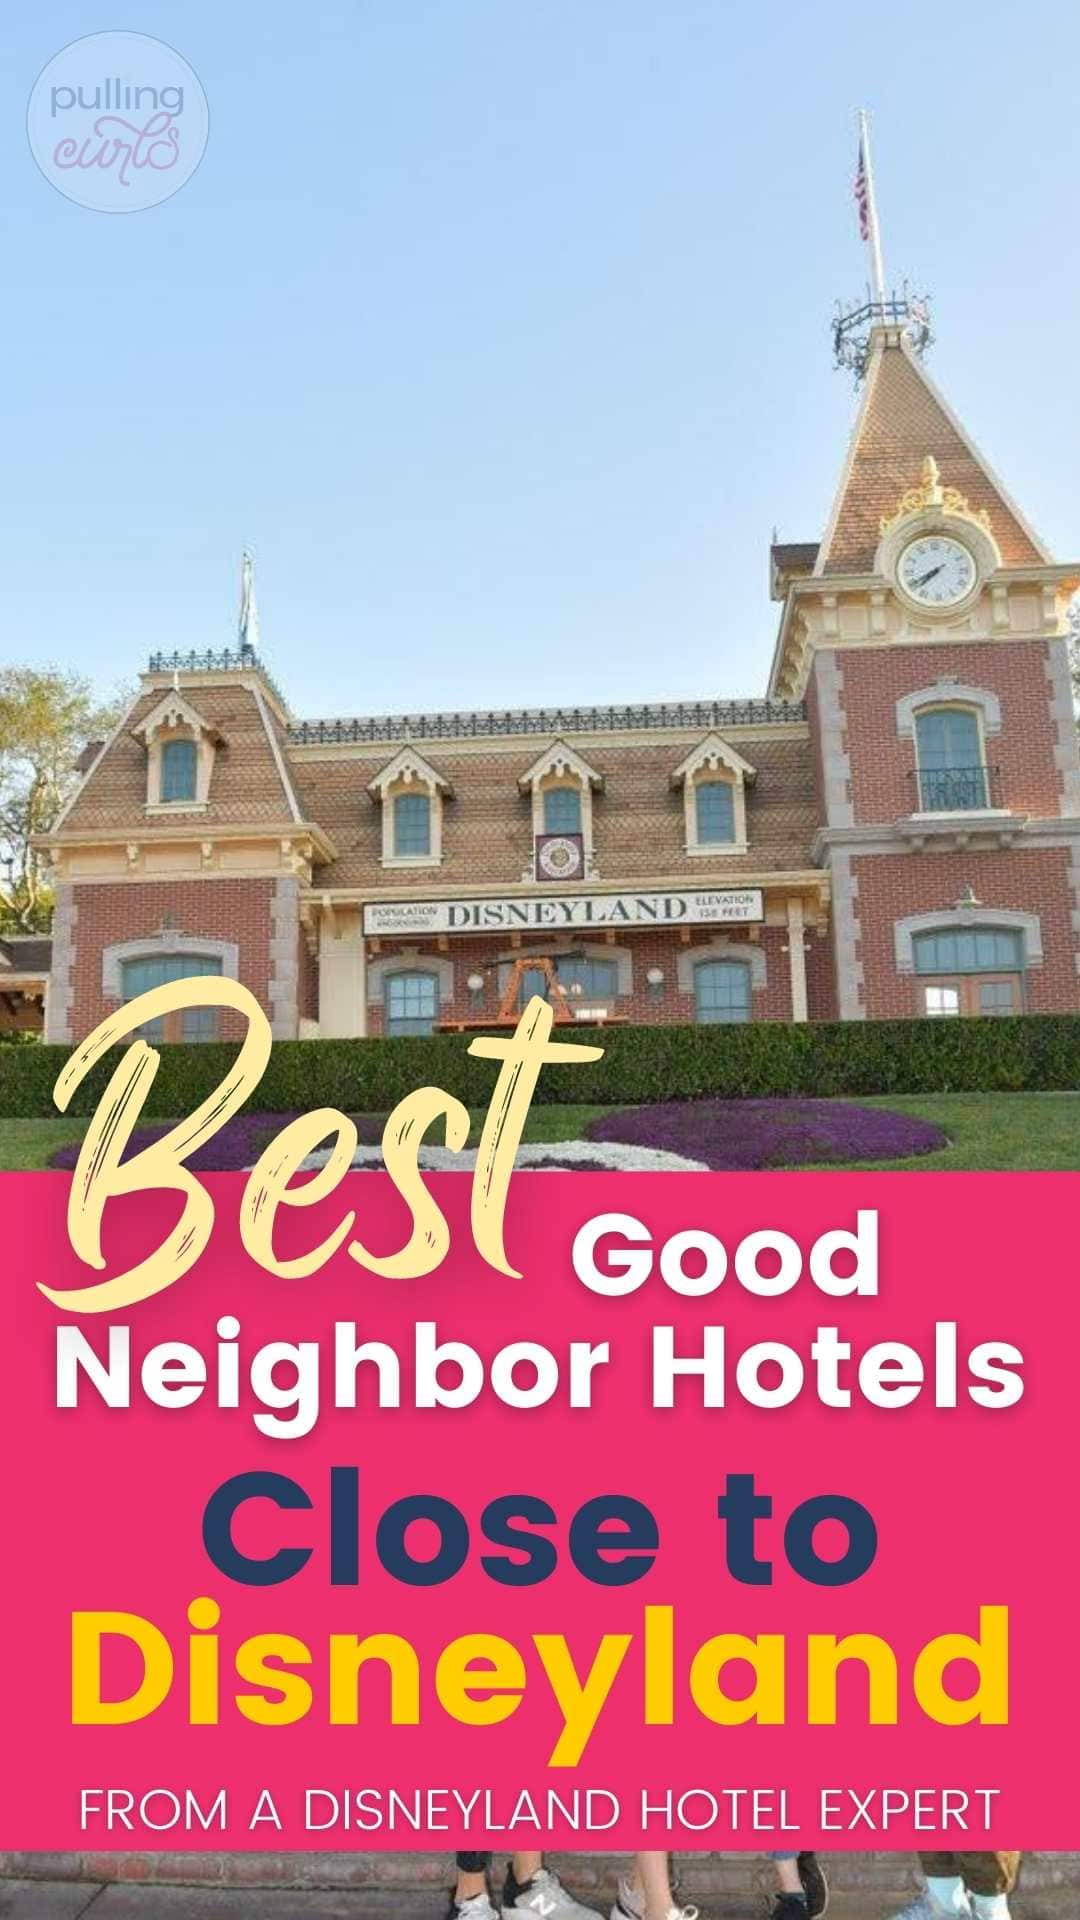 Disneyland good neighbor hotels exist because at the Anaheim resort (unlike Walt Disney World) there truly isn't enough hotel space within the Disneyland resort, so they do need to rely on hotels near Disneyland to host their guests. So, if a Disneyland hotel is out of your budget for this trip, you can still find a great deal close to Disneyland for your family when you're planning your Disneyland vacation. I hope to list all of the good hotels you can check out as you pick the best Disneyland hotel for your family! via @pullingcurls